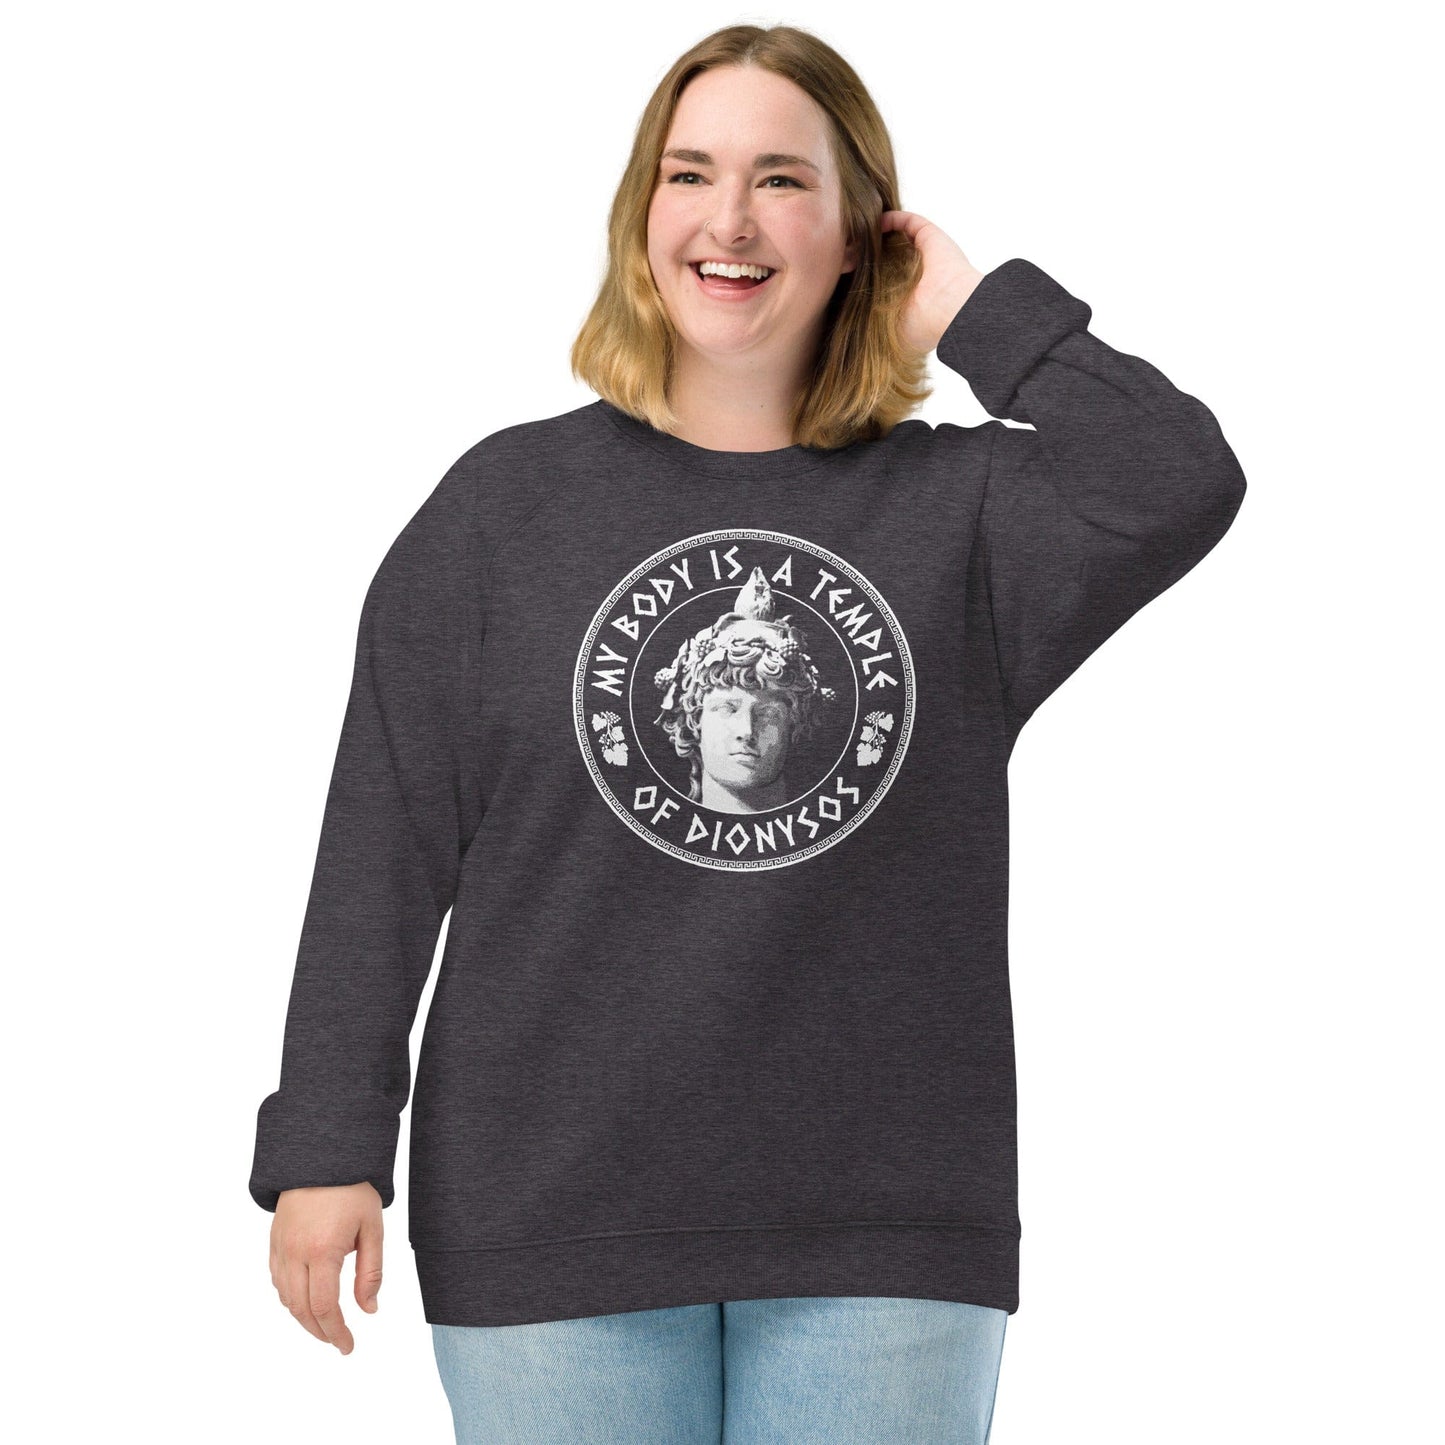 My Body Is A Temple Of Dionysos - Eco Sweatshirt